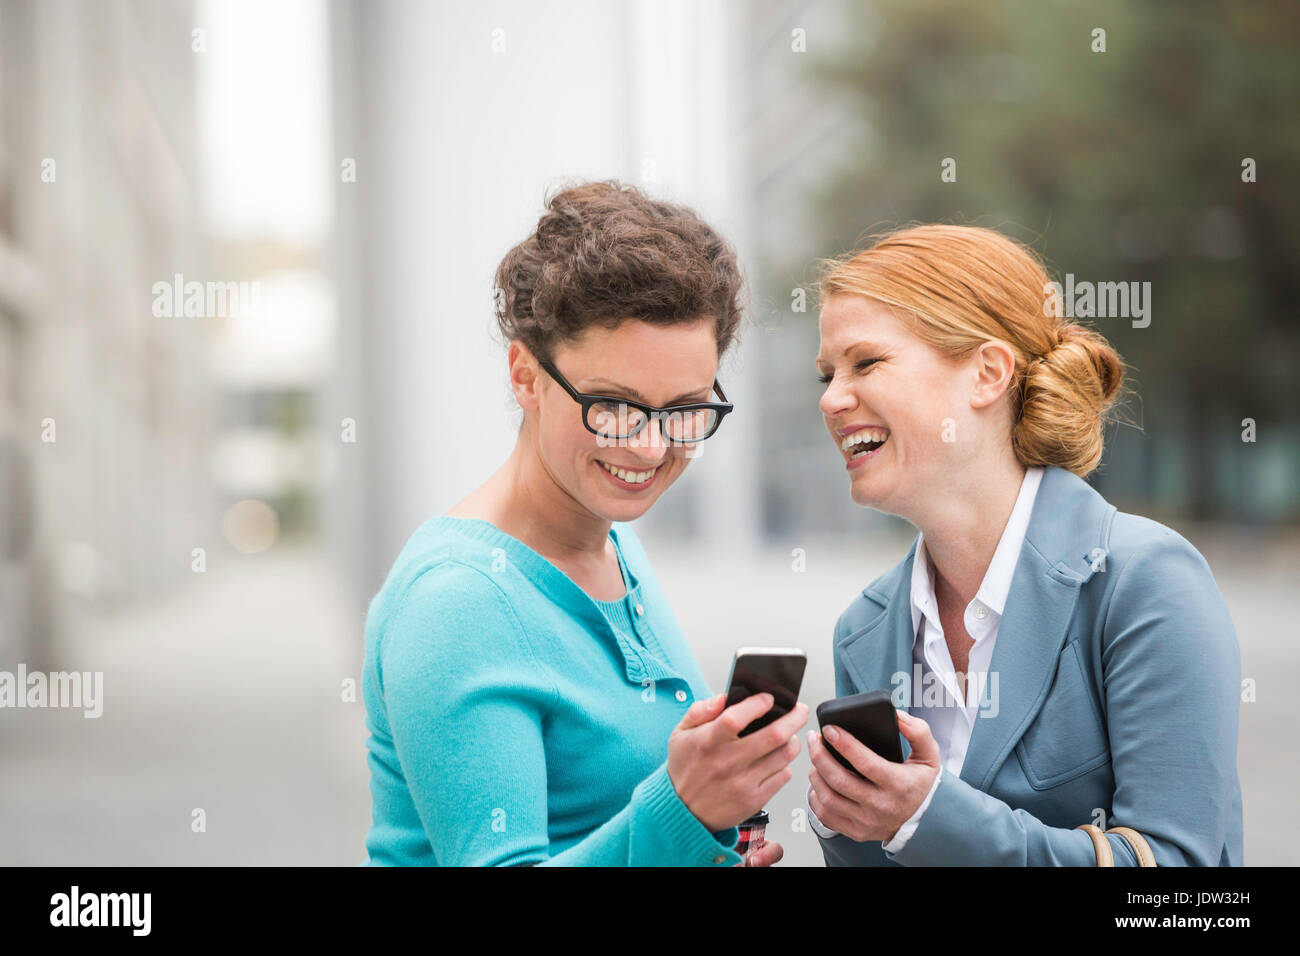 Business people using cell phones Stock Photo